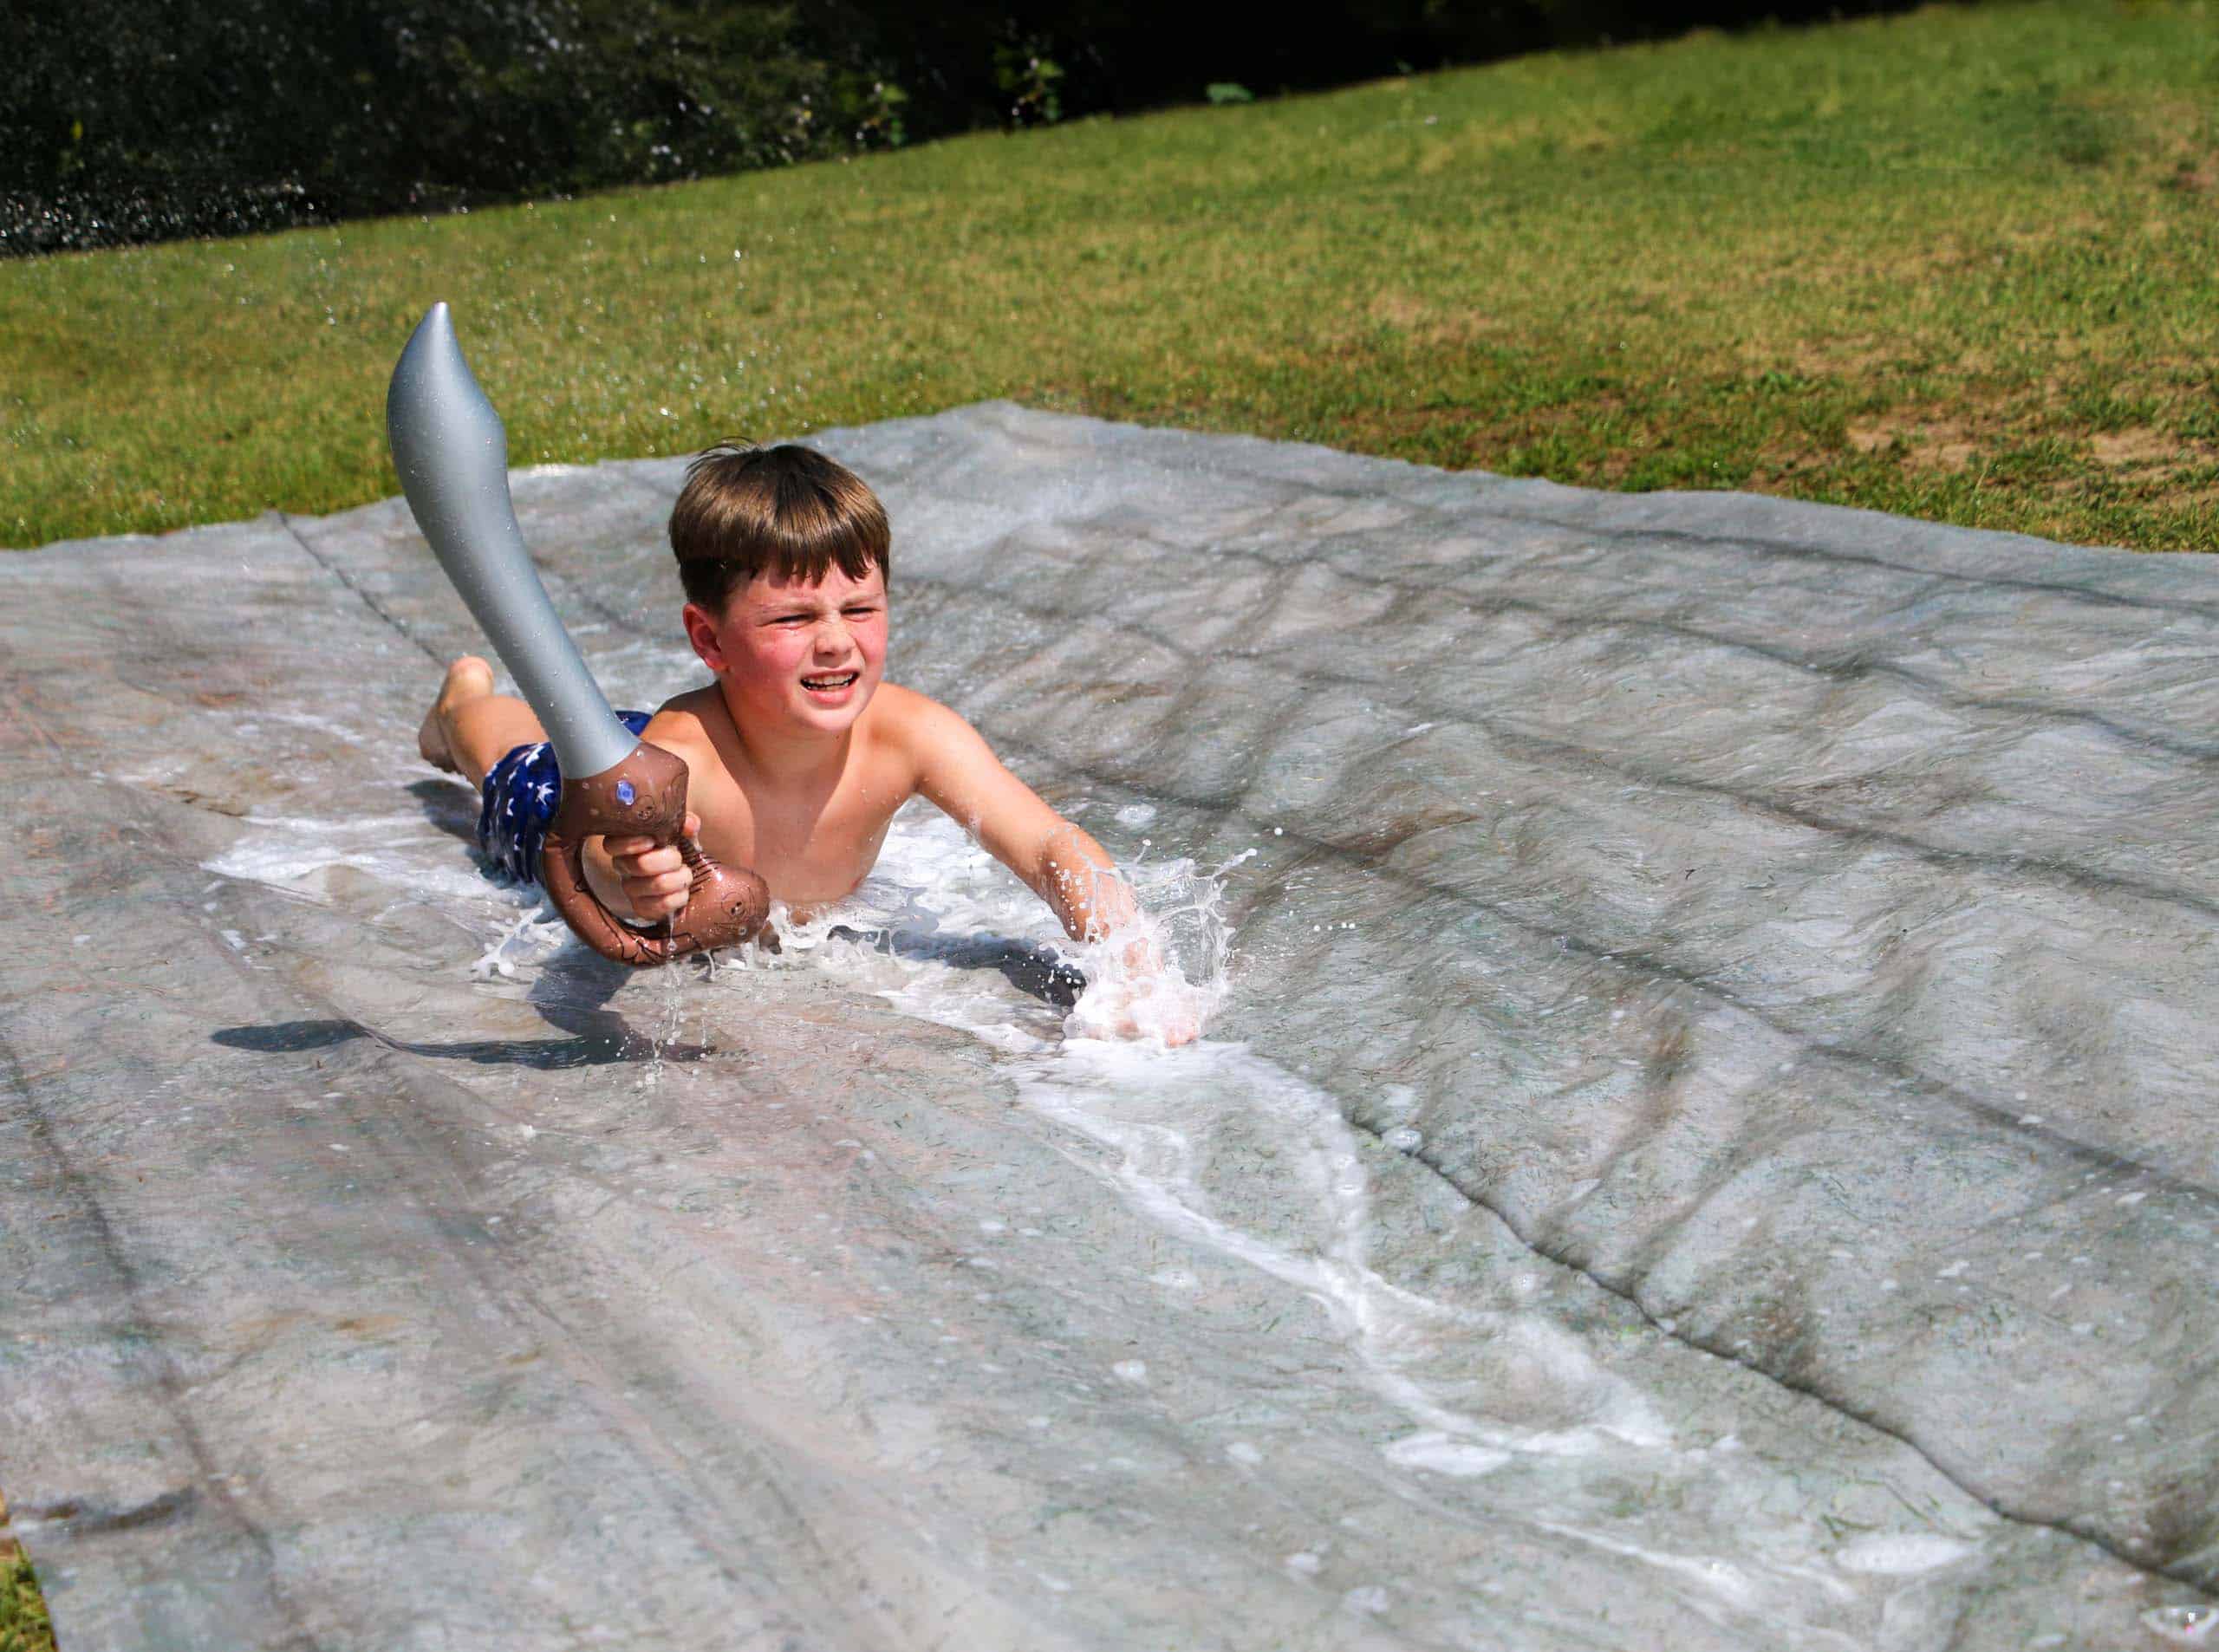 A boy sliding down a water slide at a summer camp in Iowa, holding a toy sword.